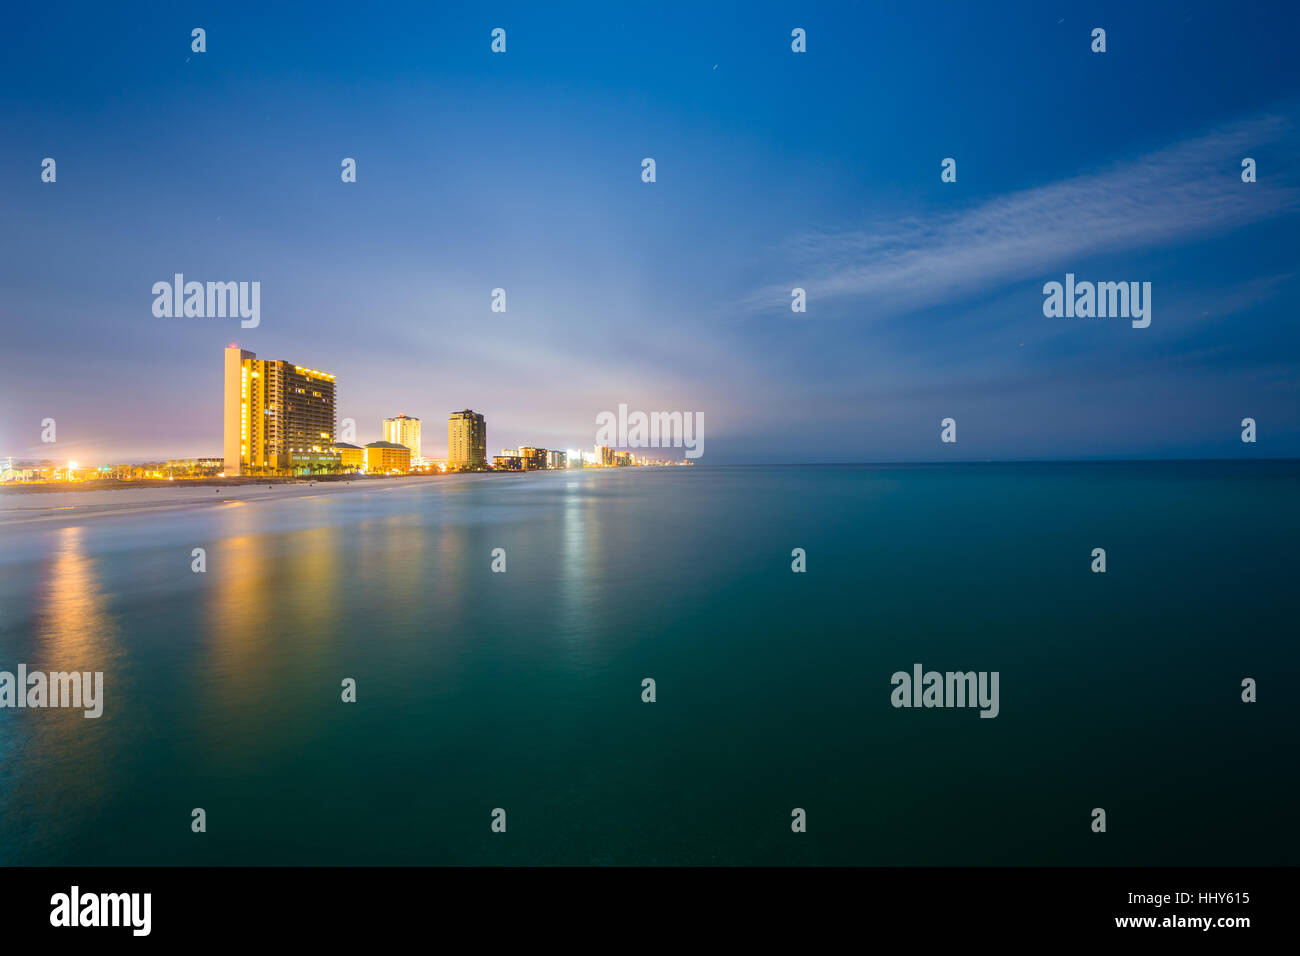 Highrises Along The Gulf Of Mexico At Night In Panama City Beach